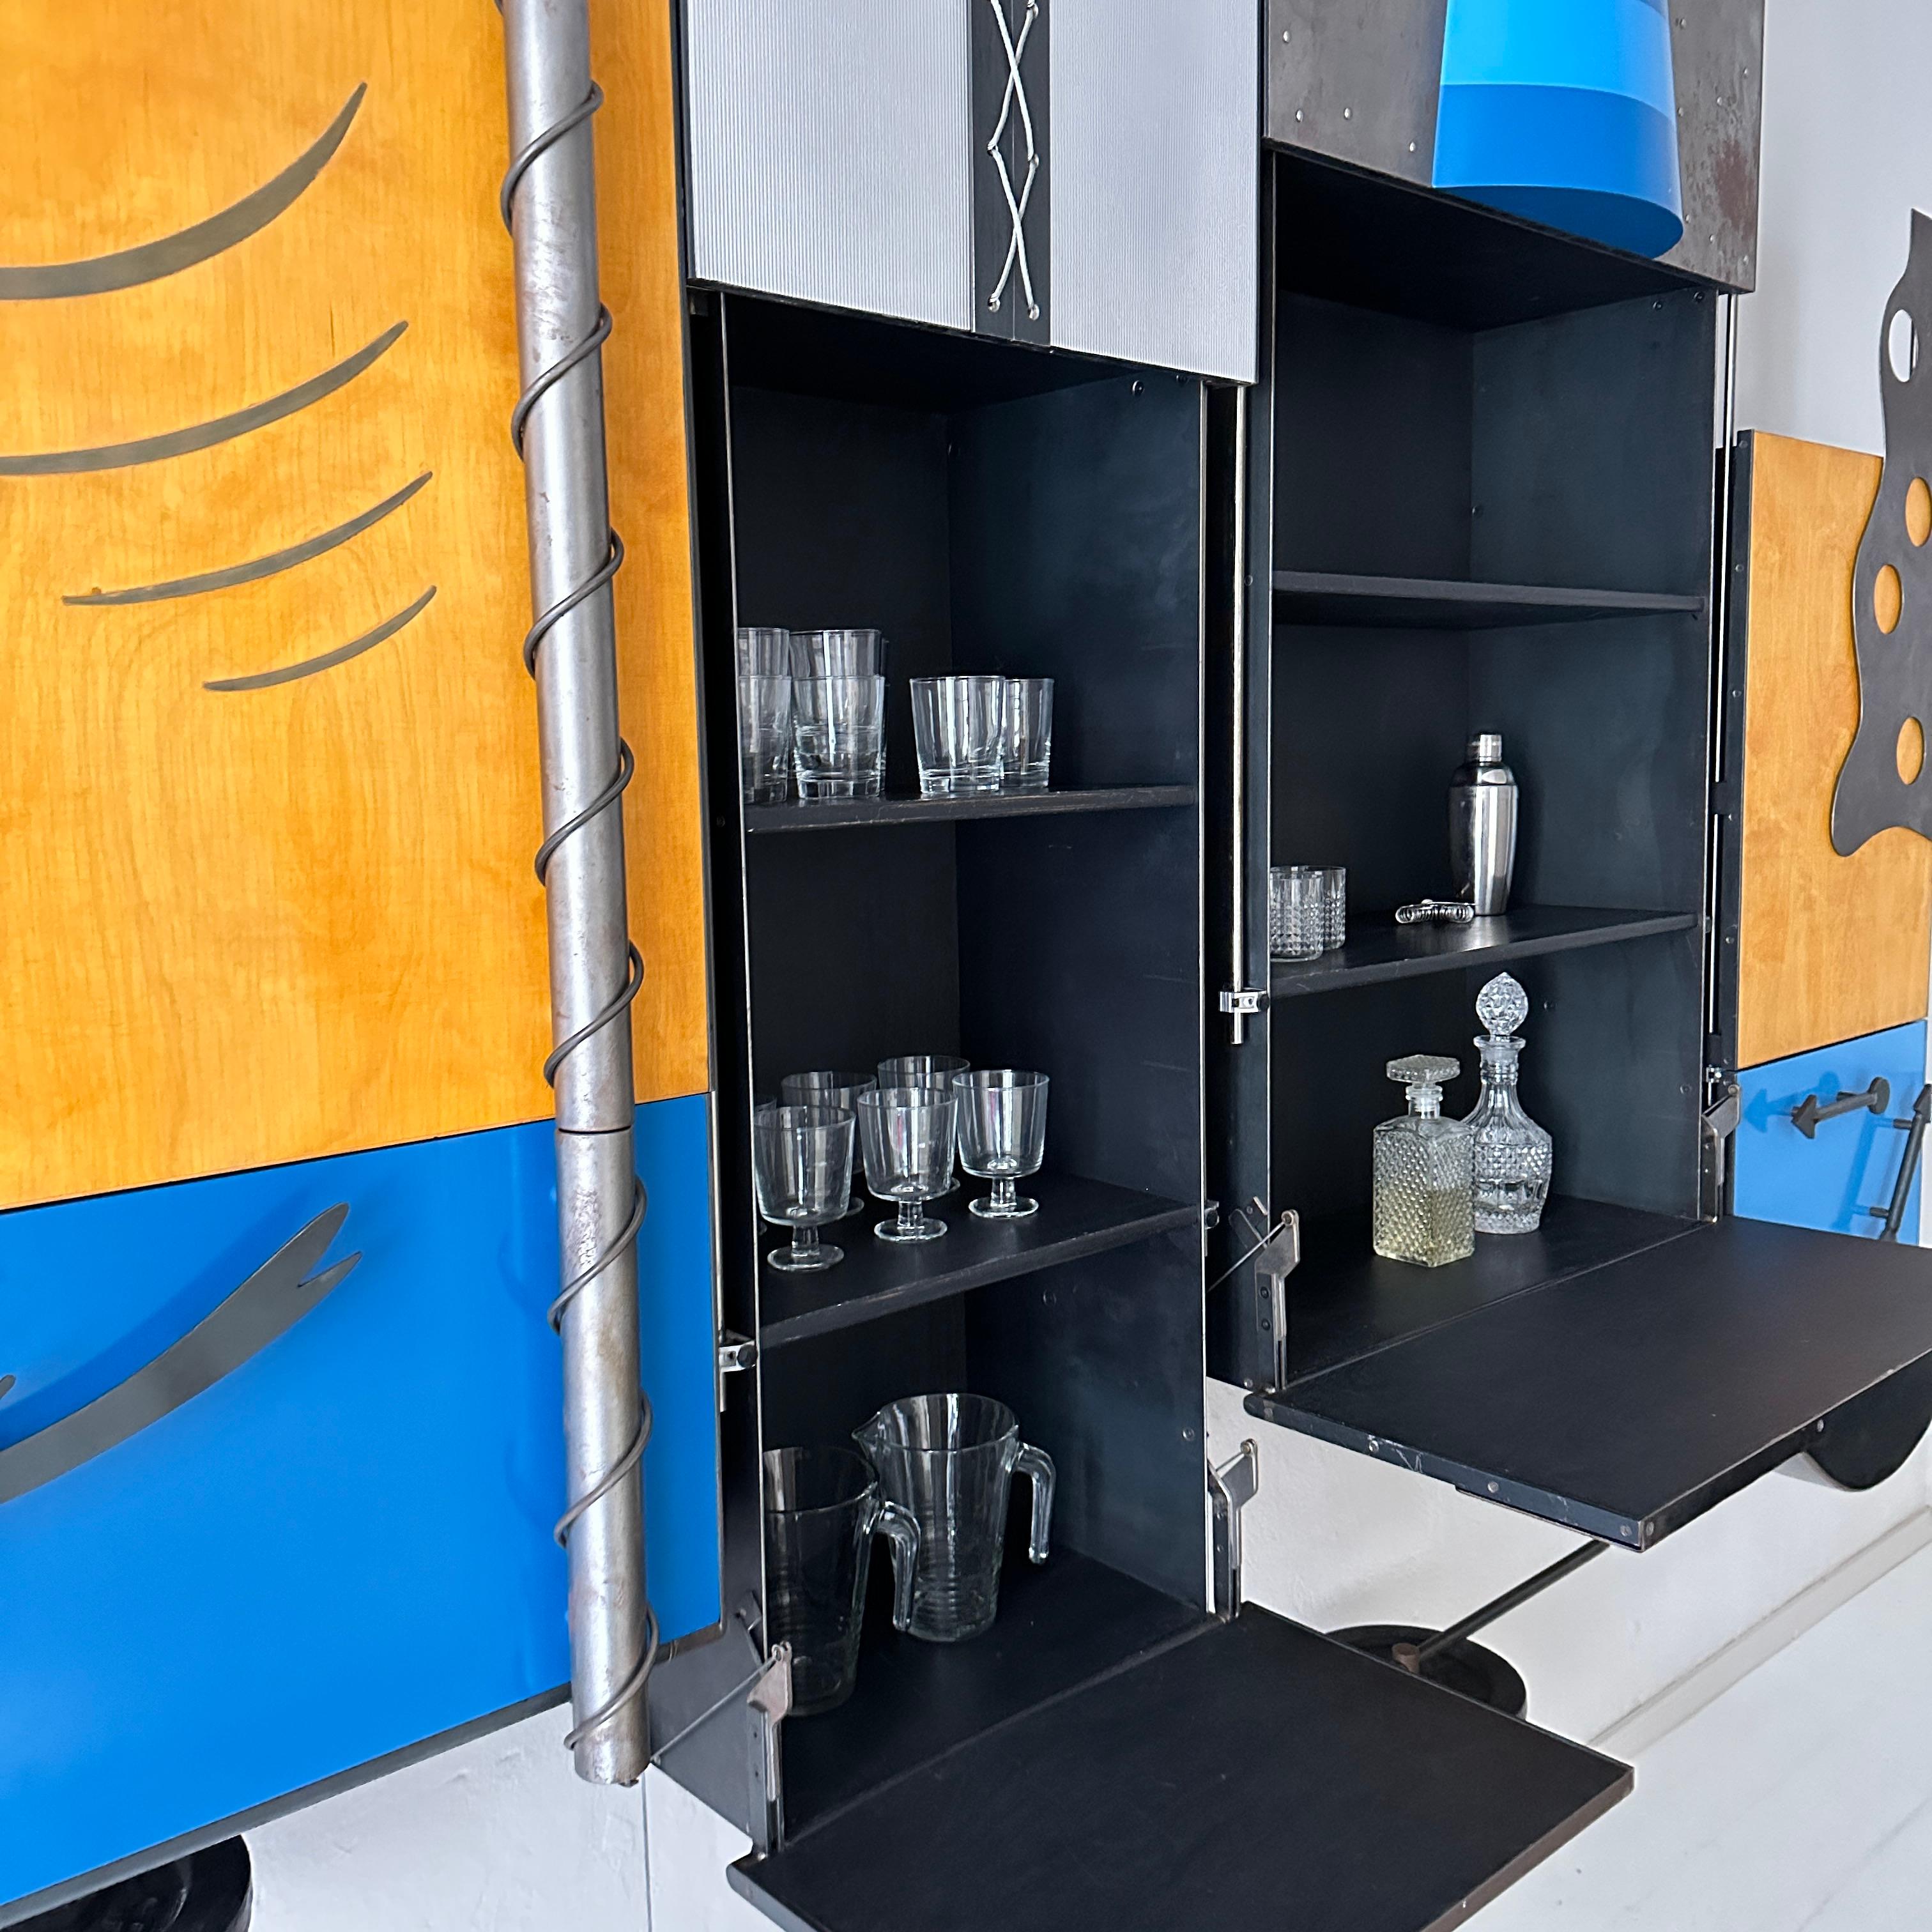 Postmoderne 1980 The Moderns Big Wall-Unit in Metall, lacquered Plywood in Blue, White Black en vente